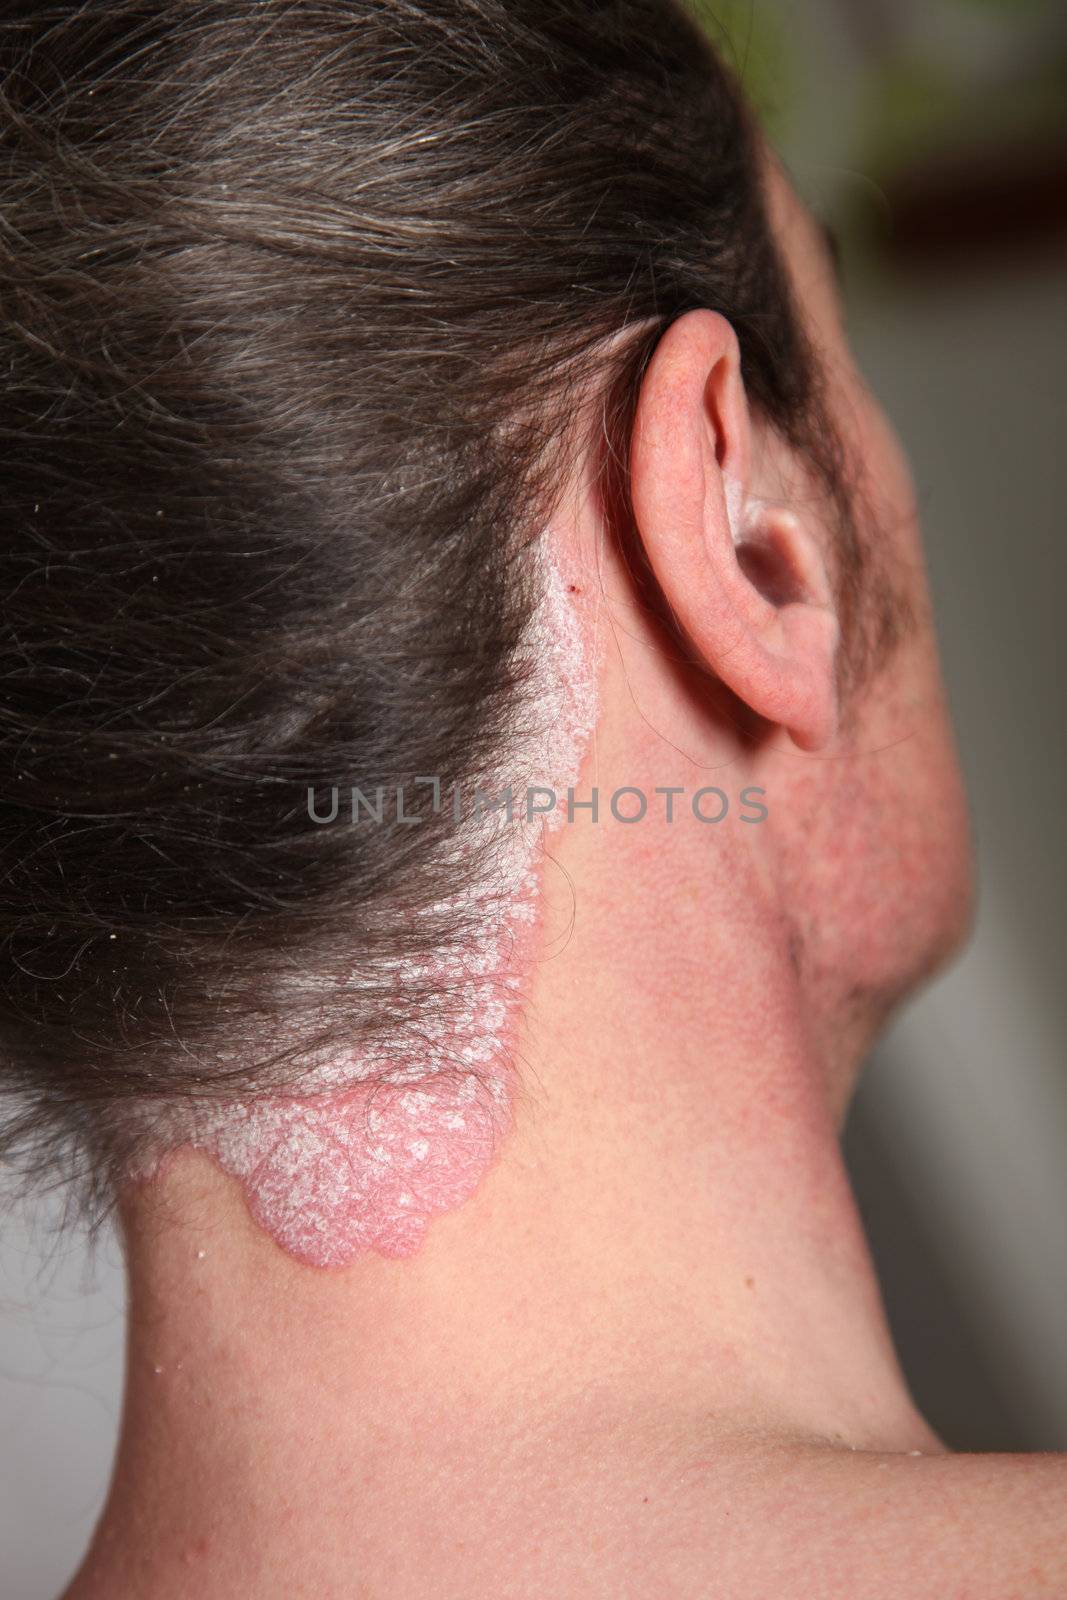 Severe psoriasis neck and neck as well as in the ear-closeup
 